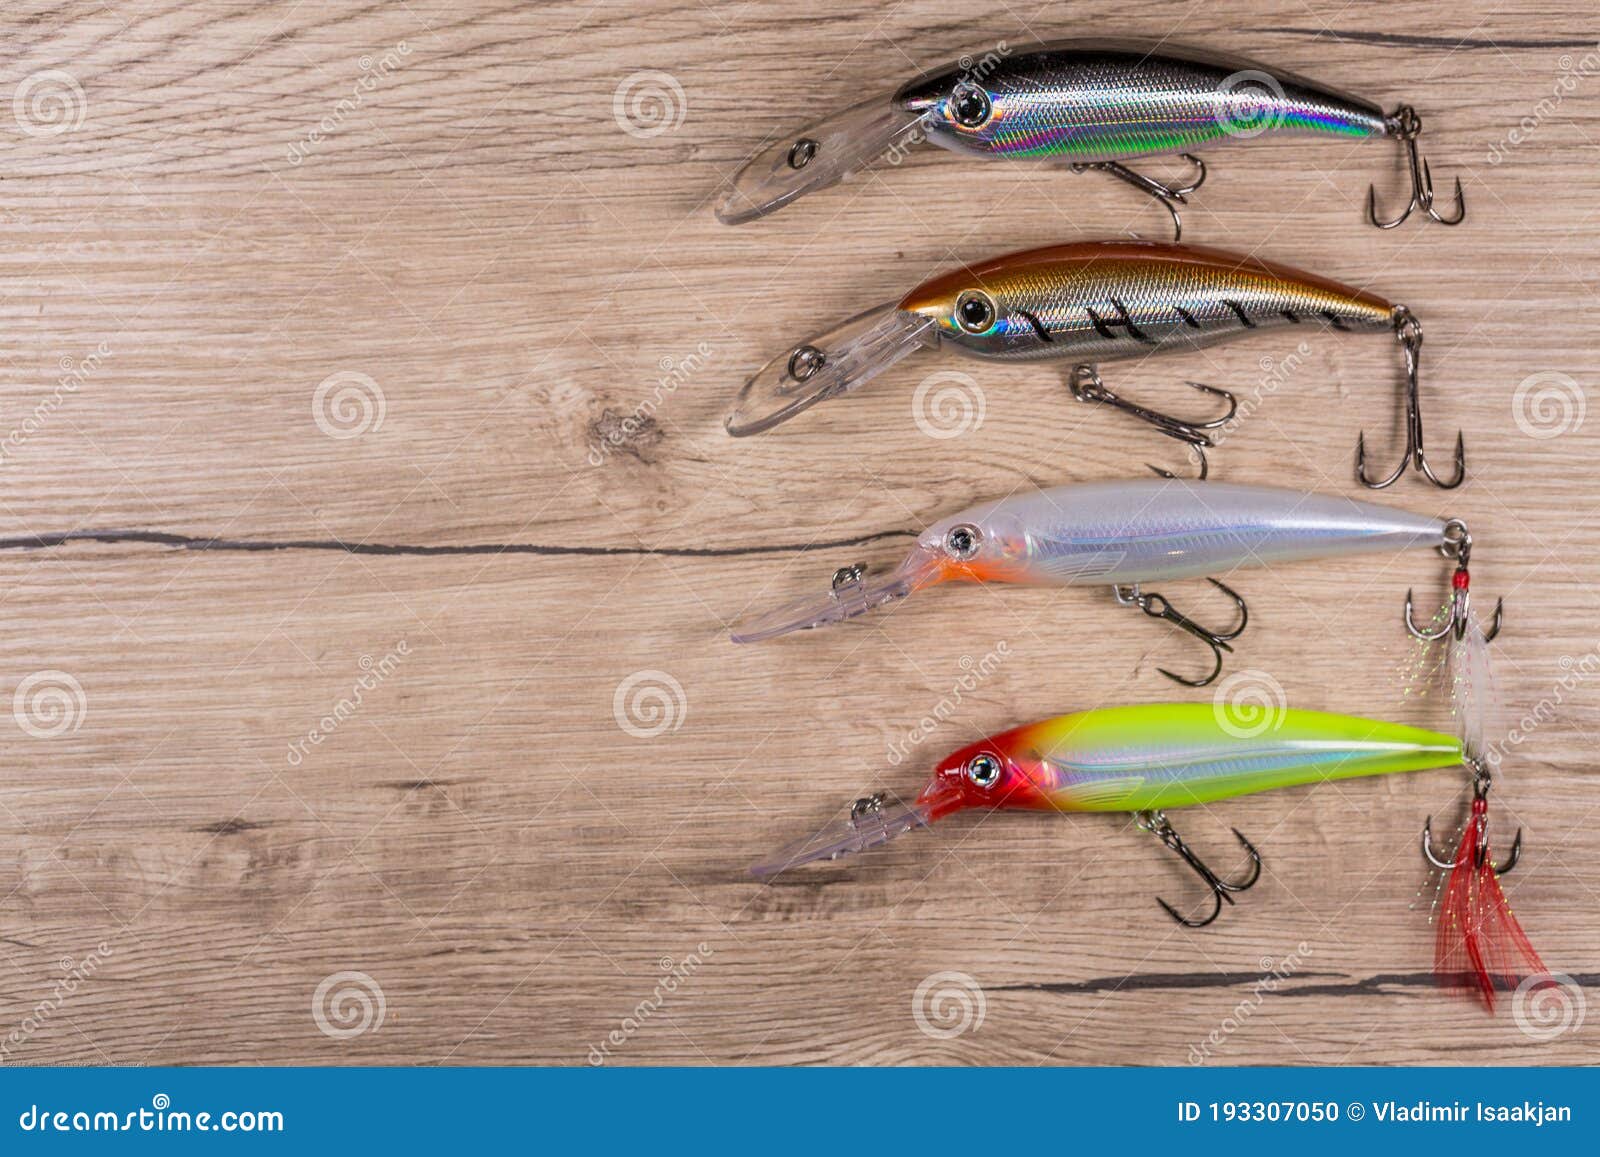 Spinner Lures and Fishing Floats on Wooden Desk Stock Photo